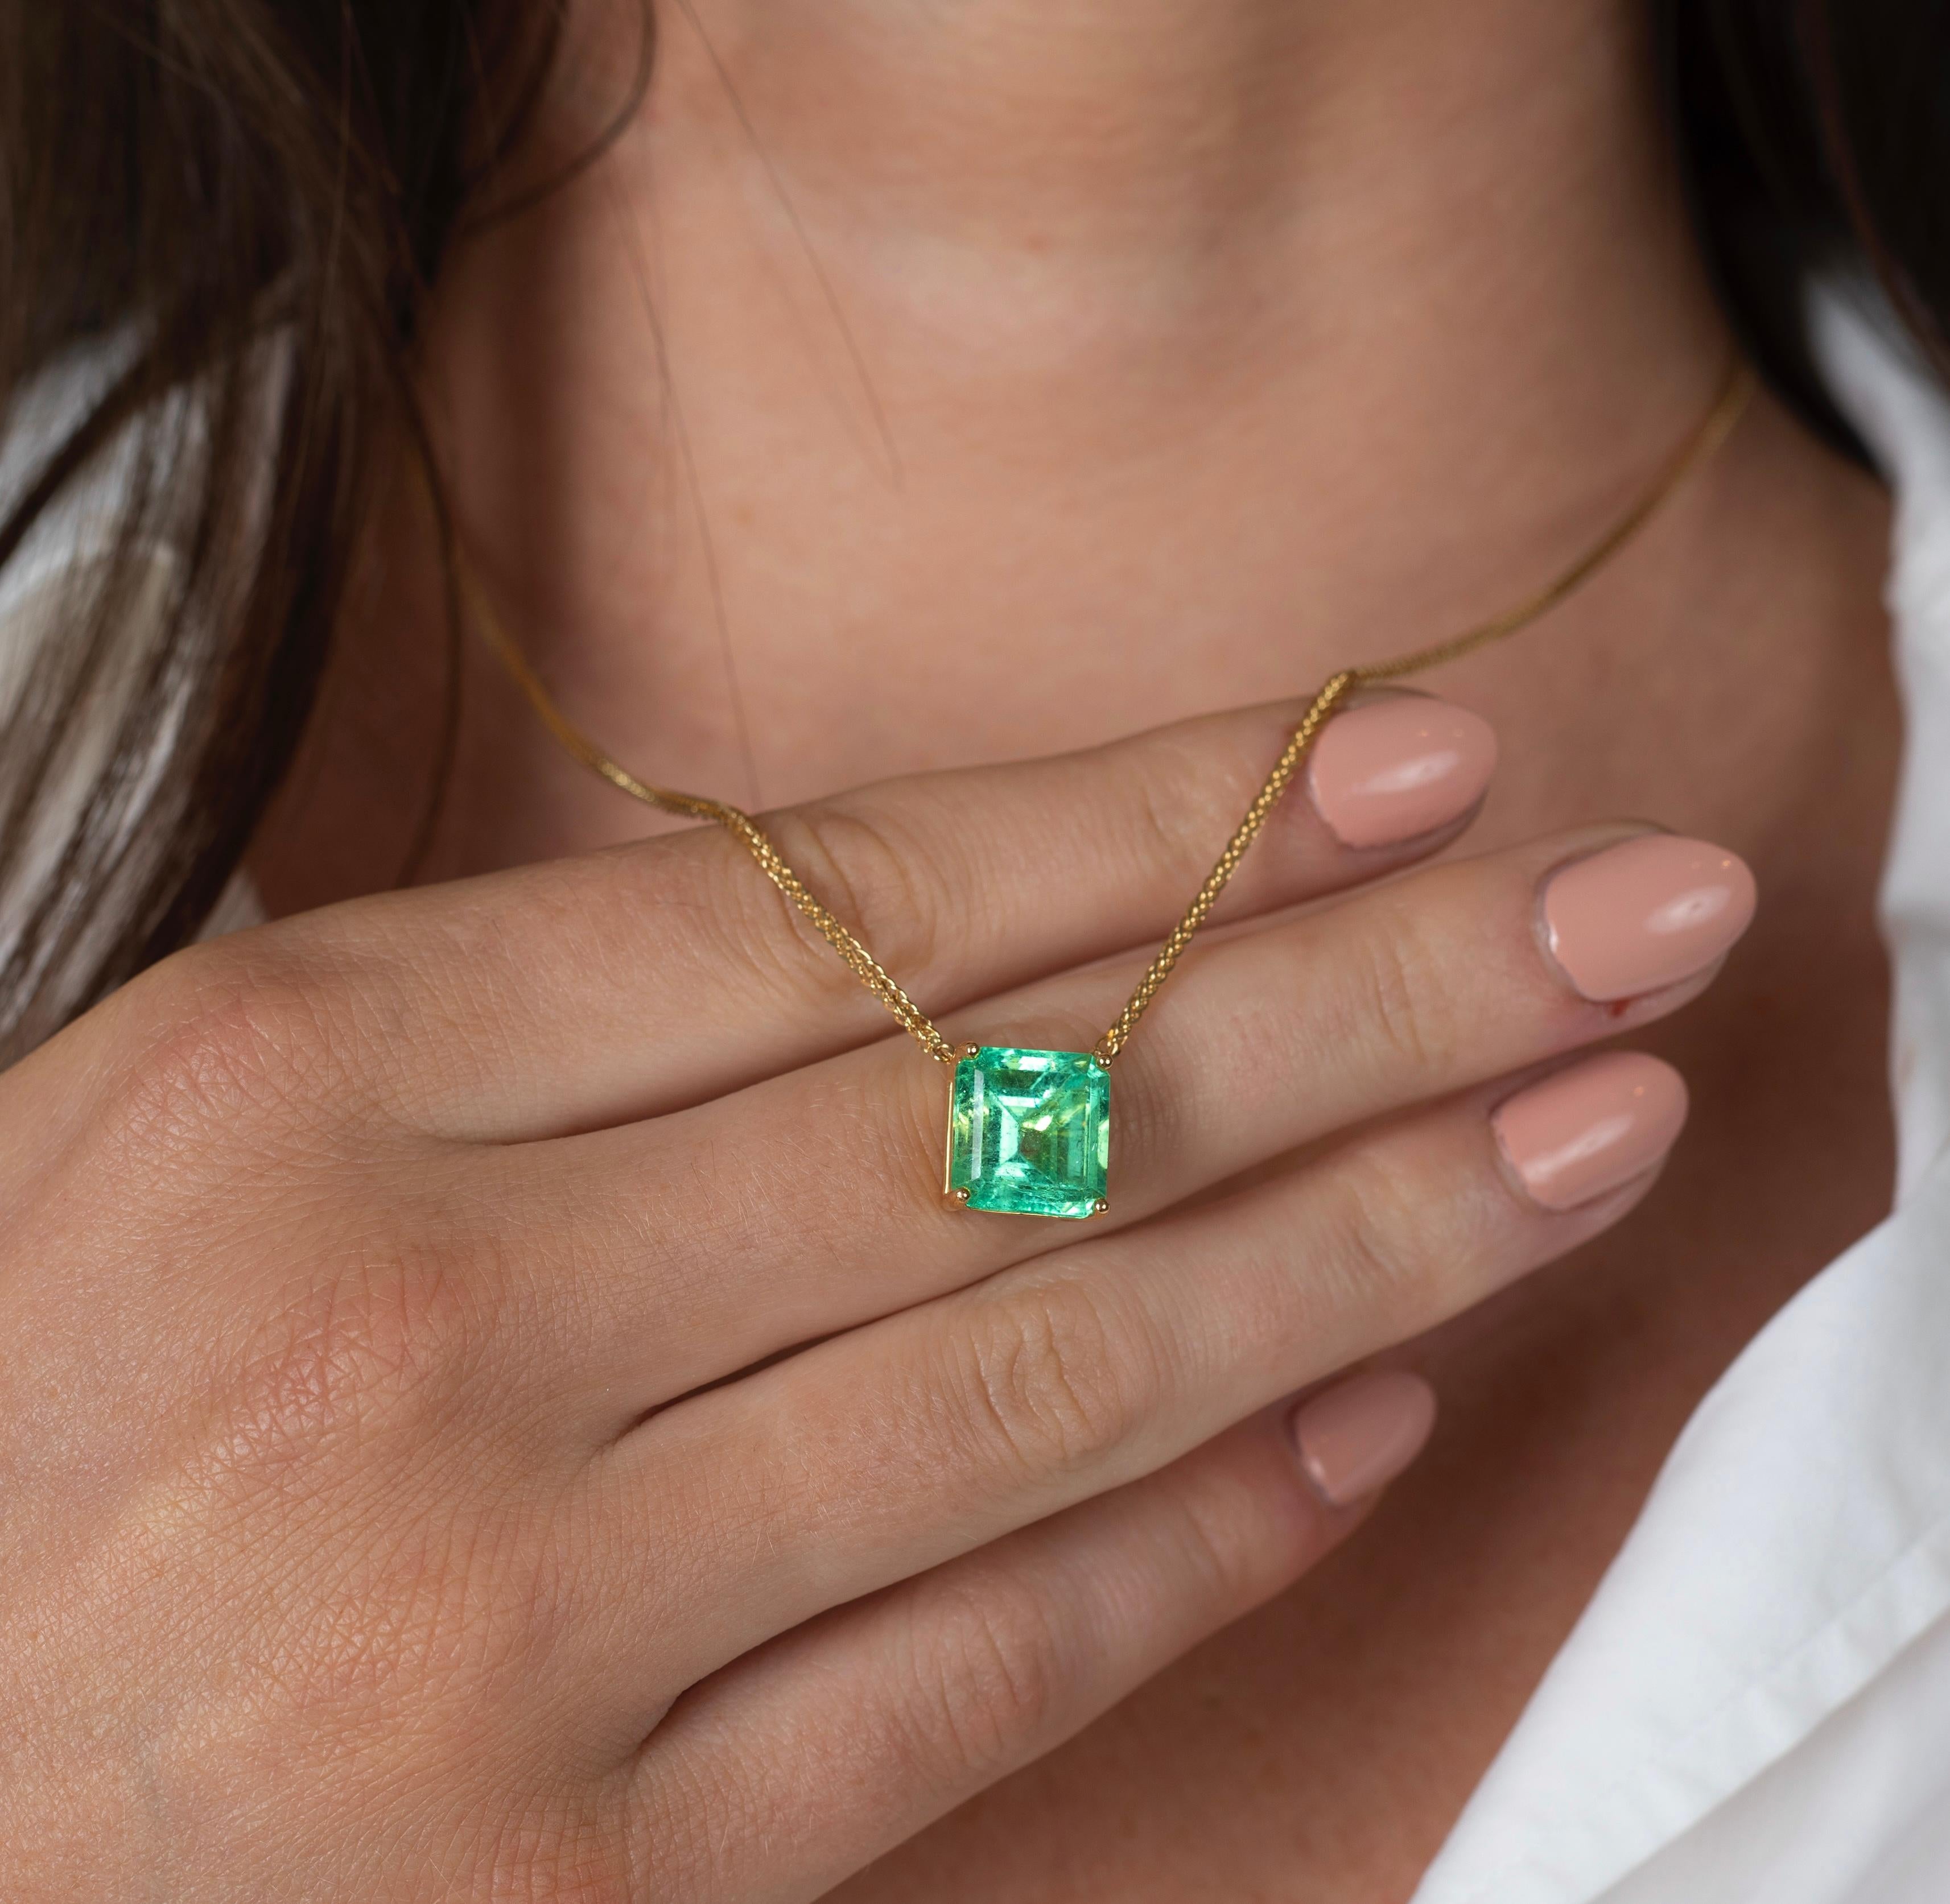 emerald solitaire necklace